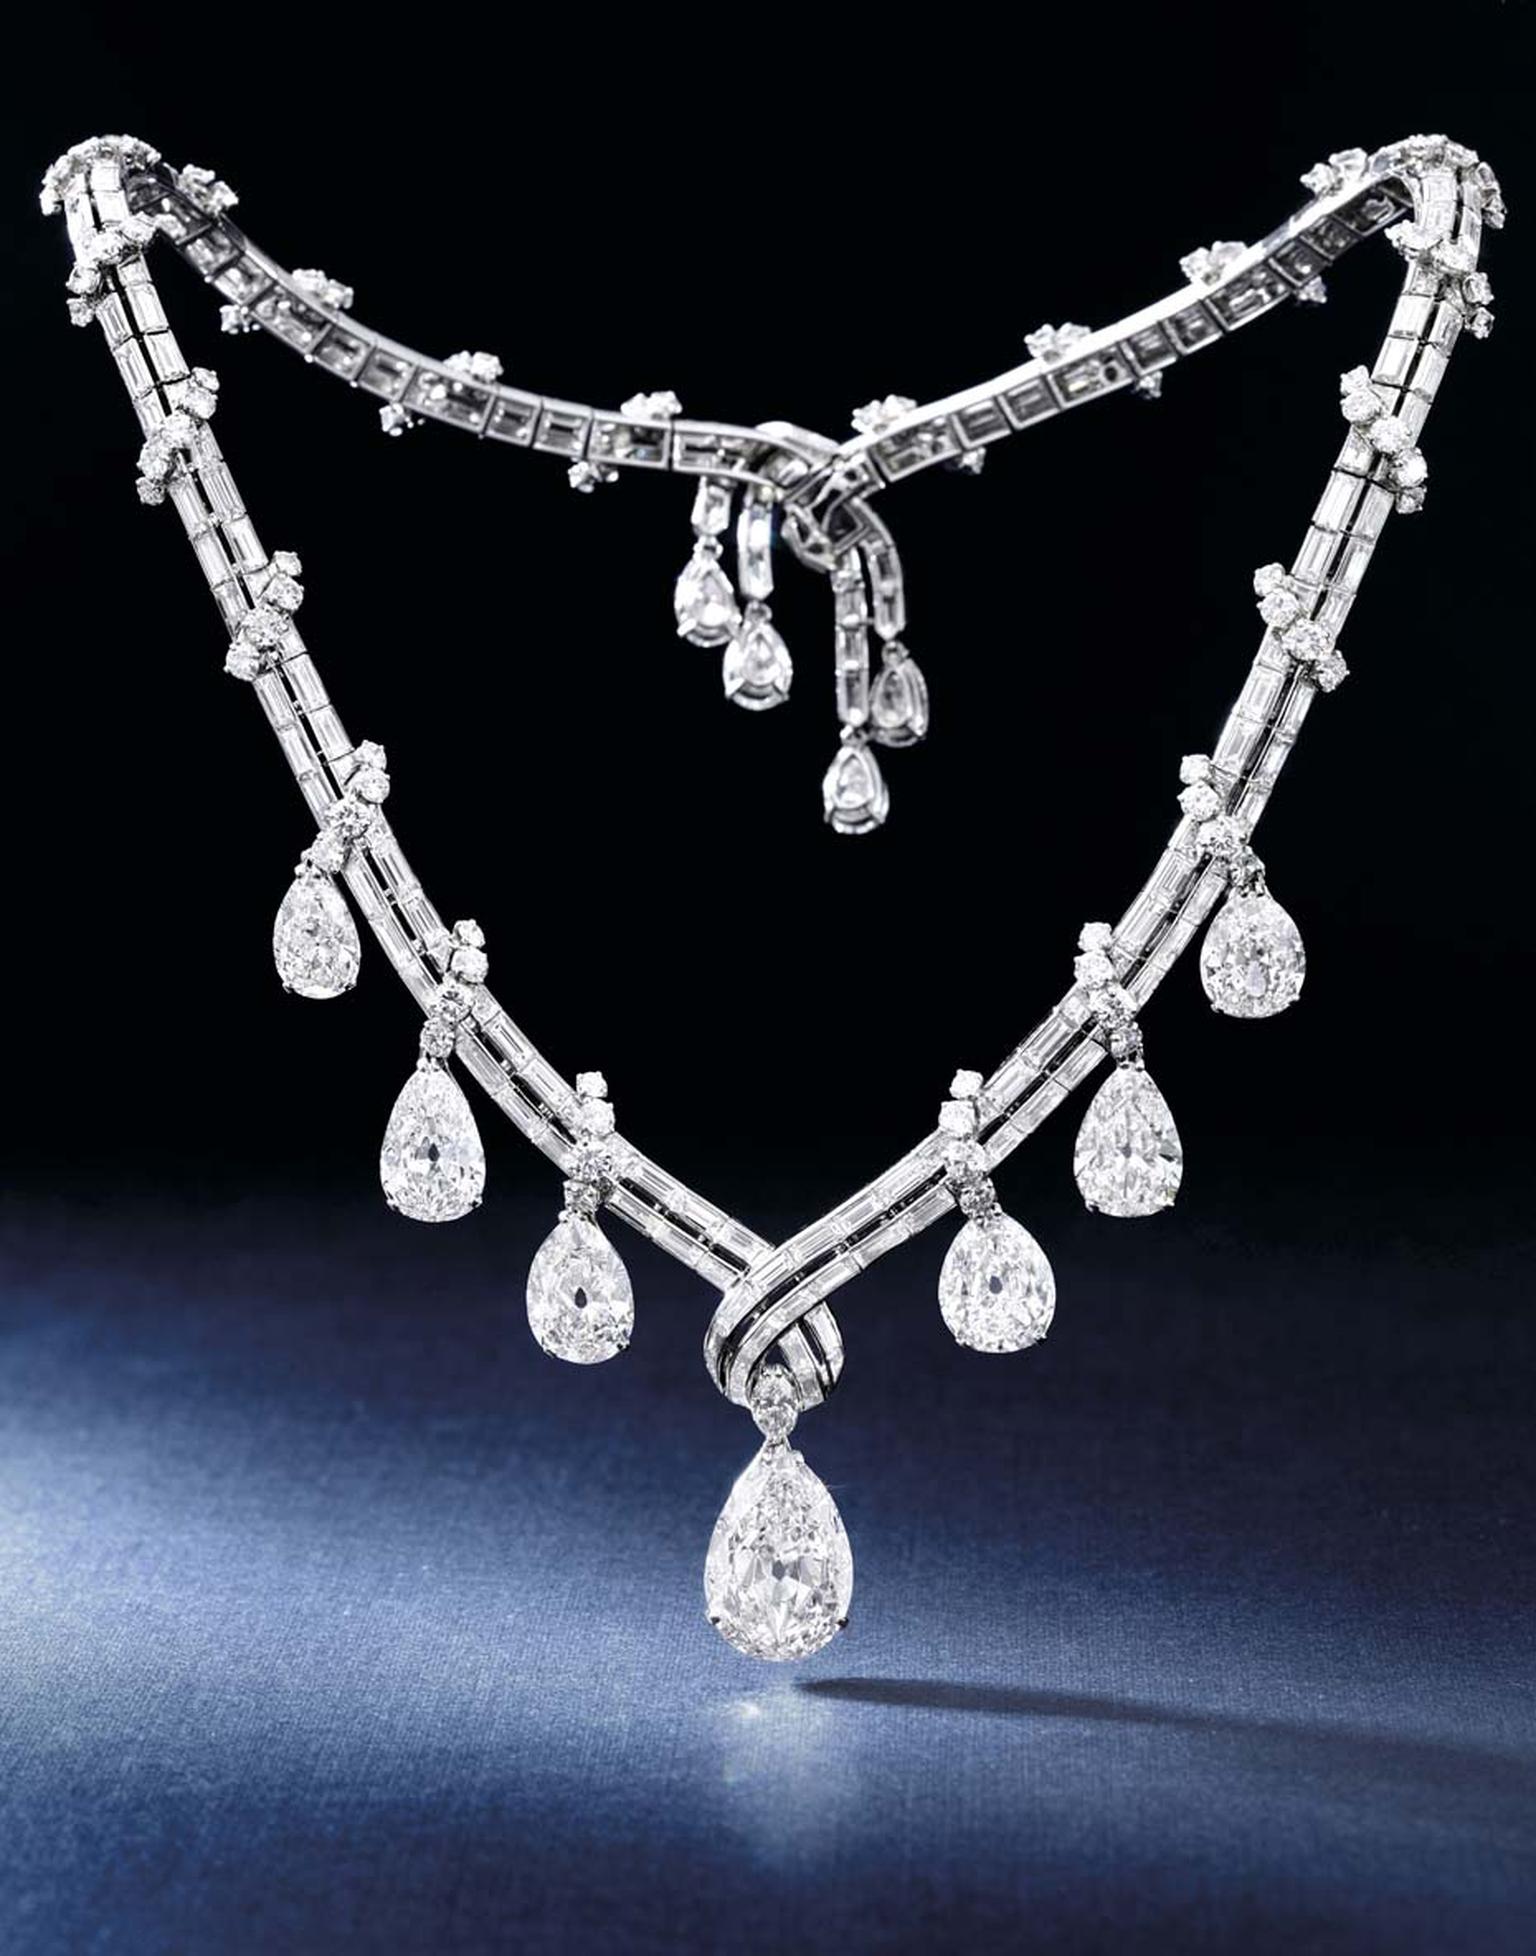 Hong Kong spring jewellery auction